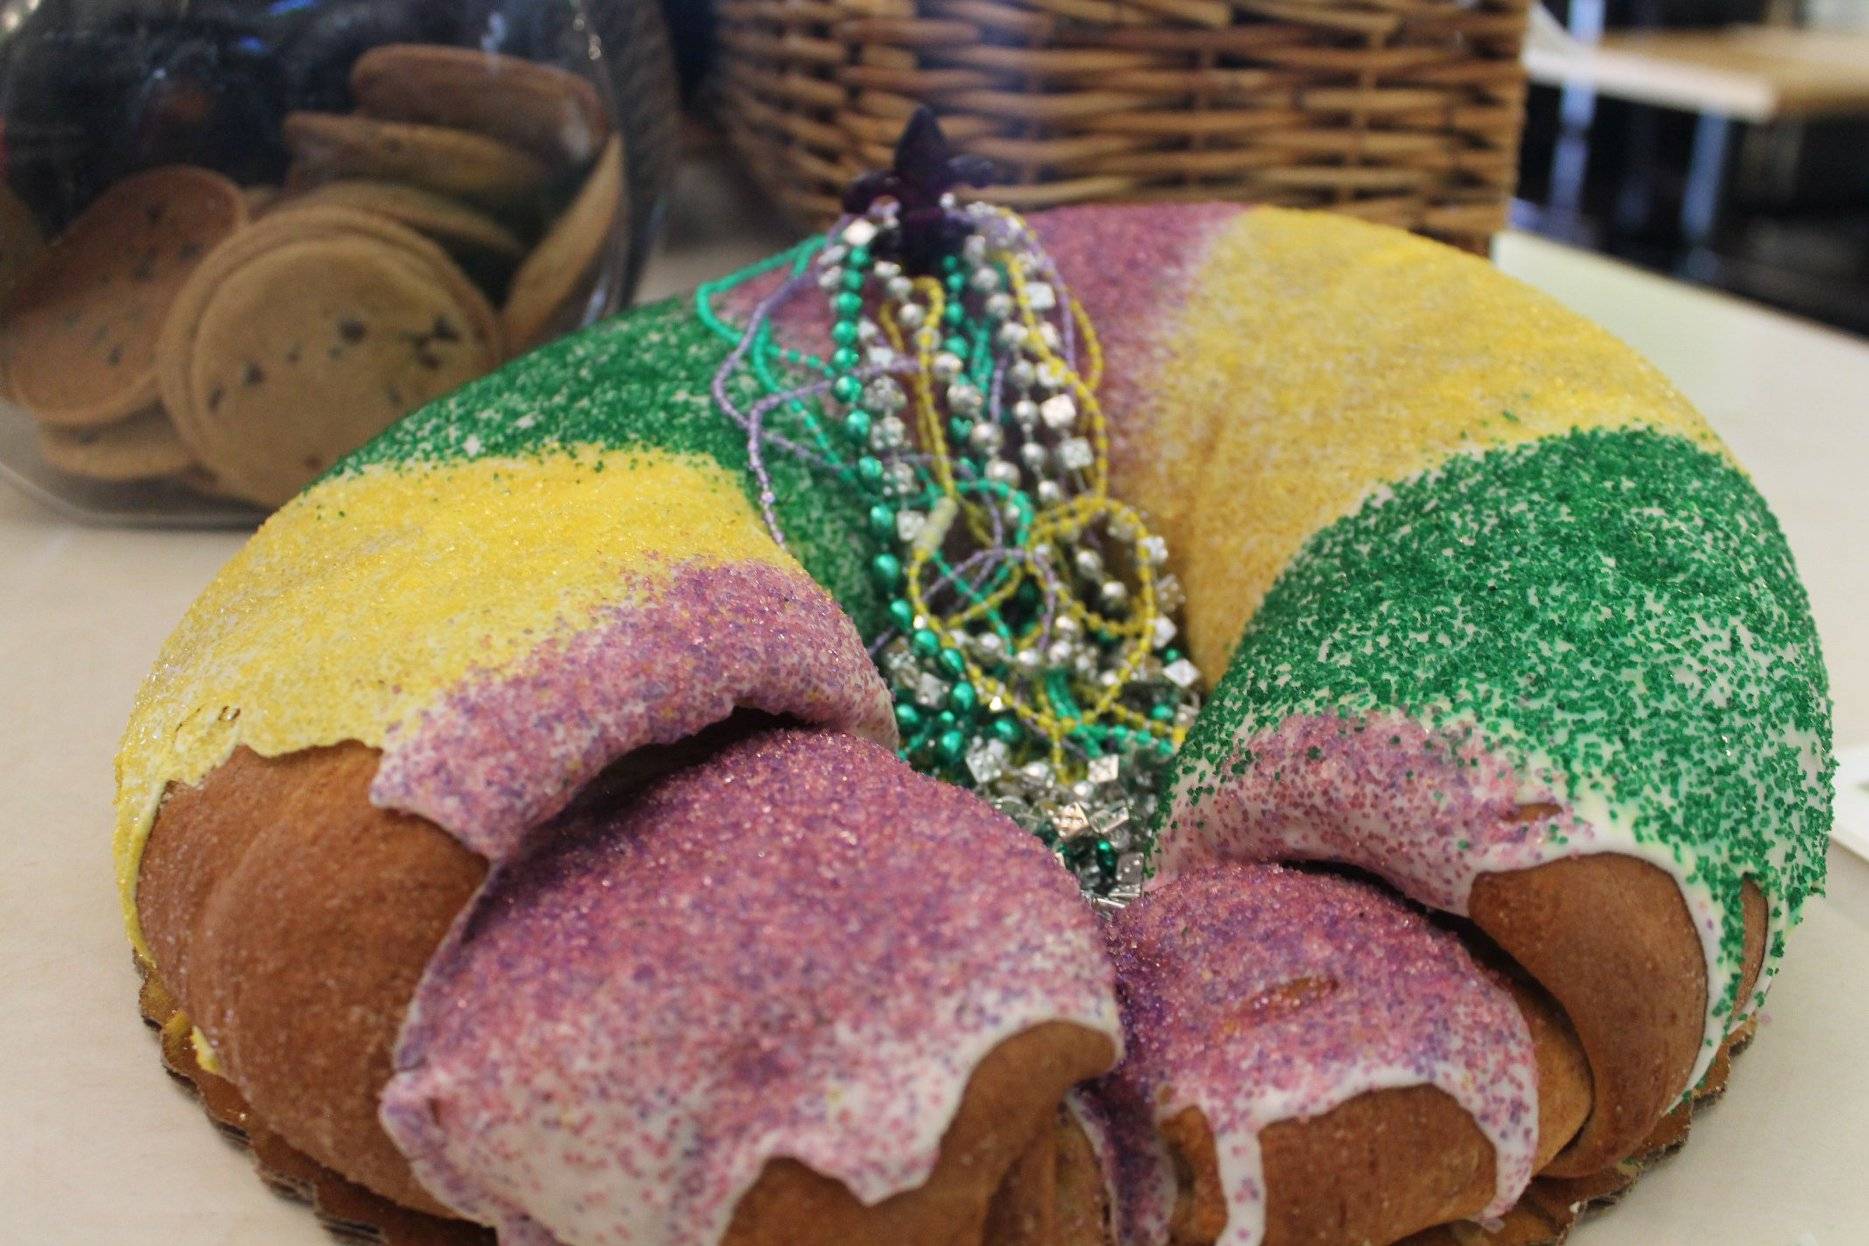 It’s almost Mardi Gras and Pekara has some delicious looking King Cakes in the case